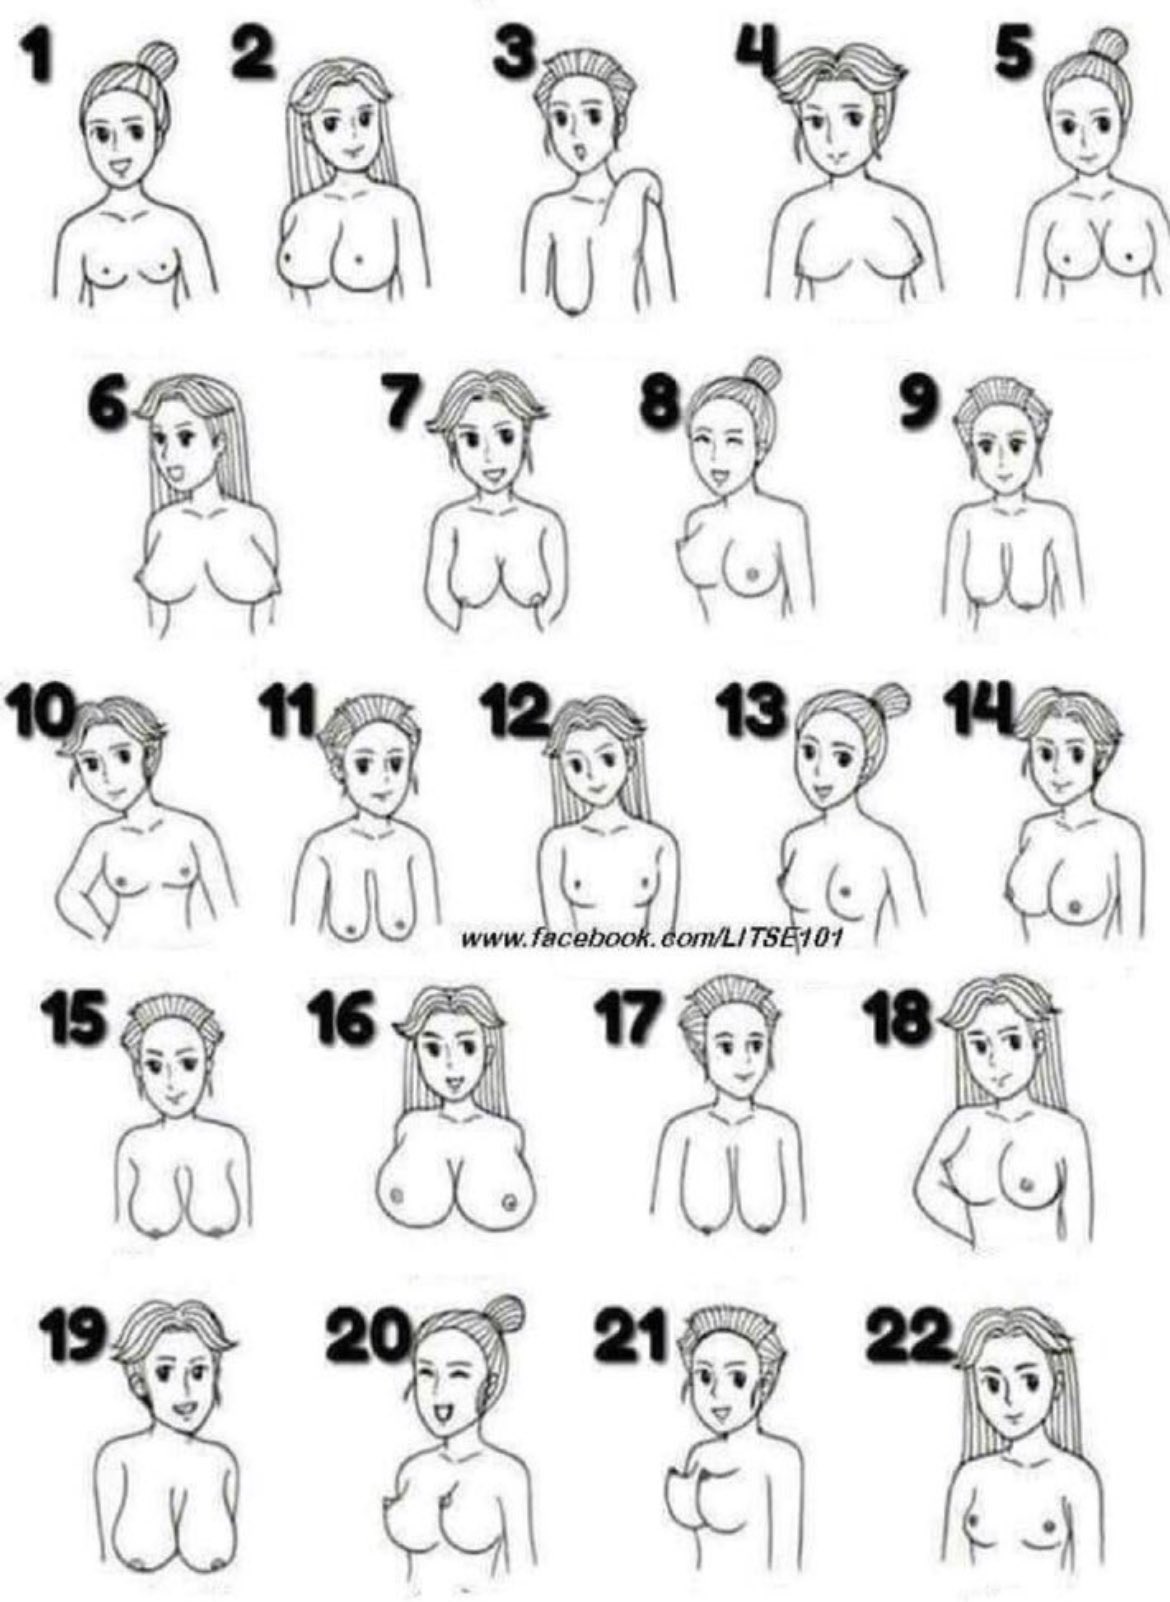 𝔑𝔞𝔱𝔬𝔯🧃 on X: which boobs shape is your favourite?